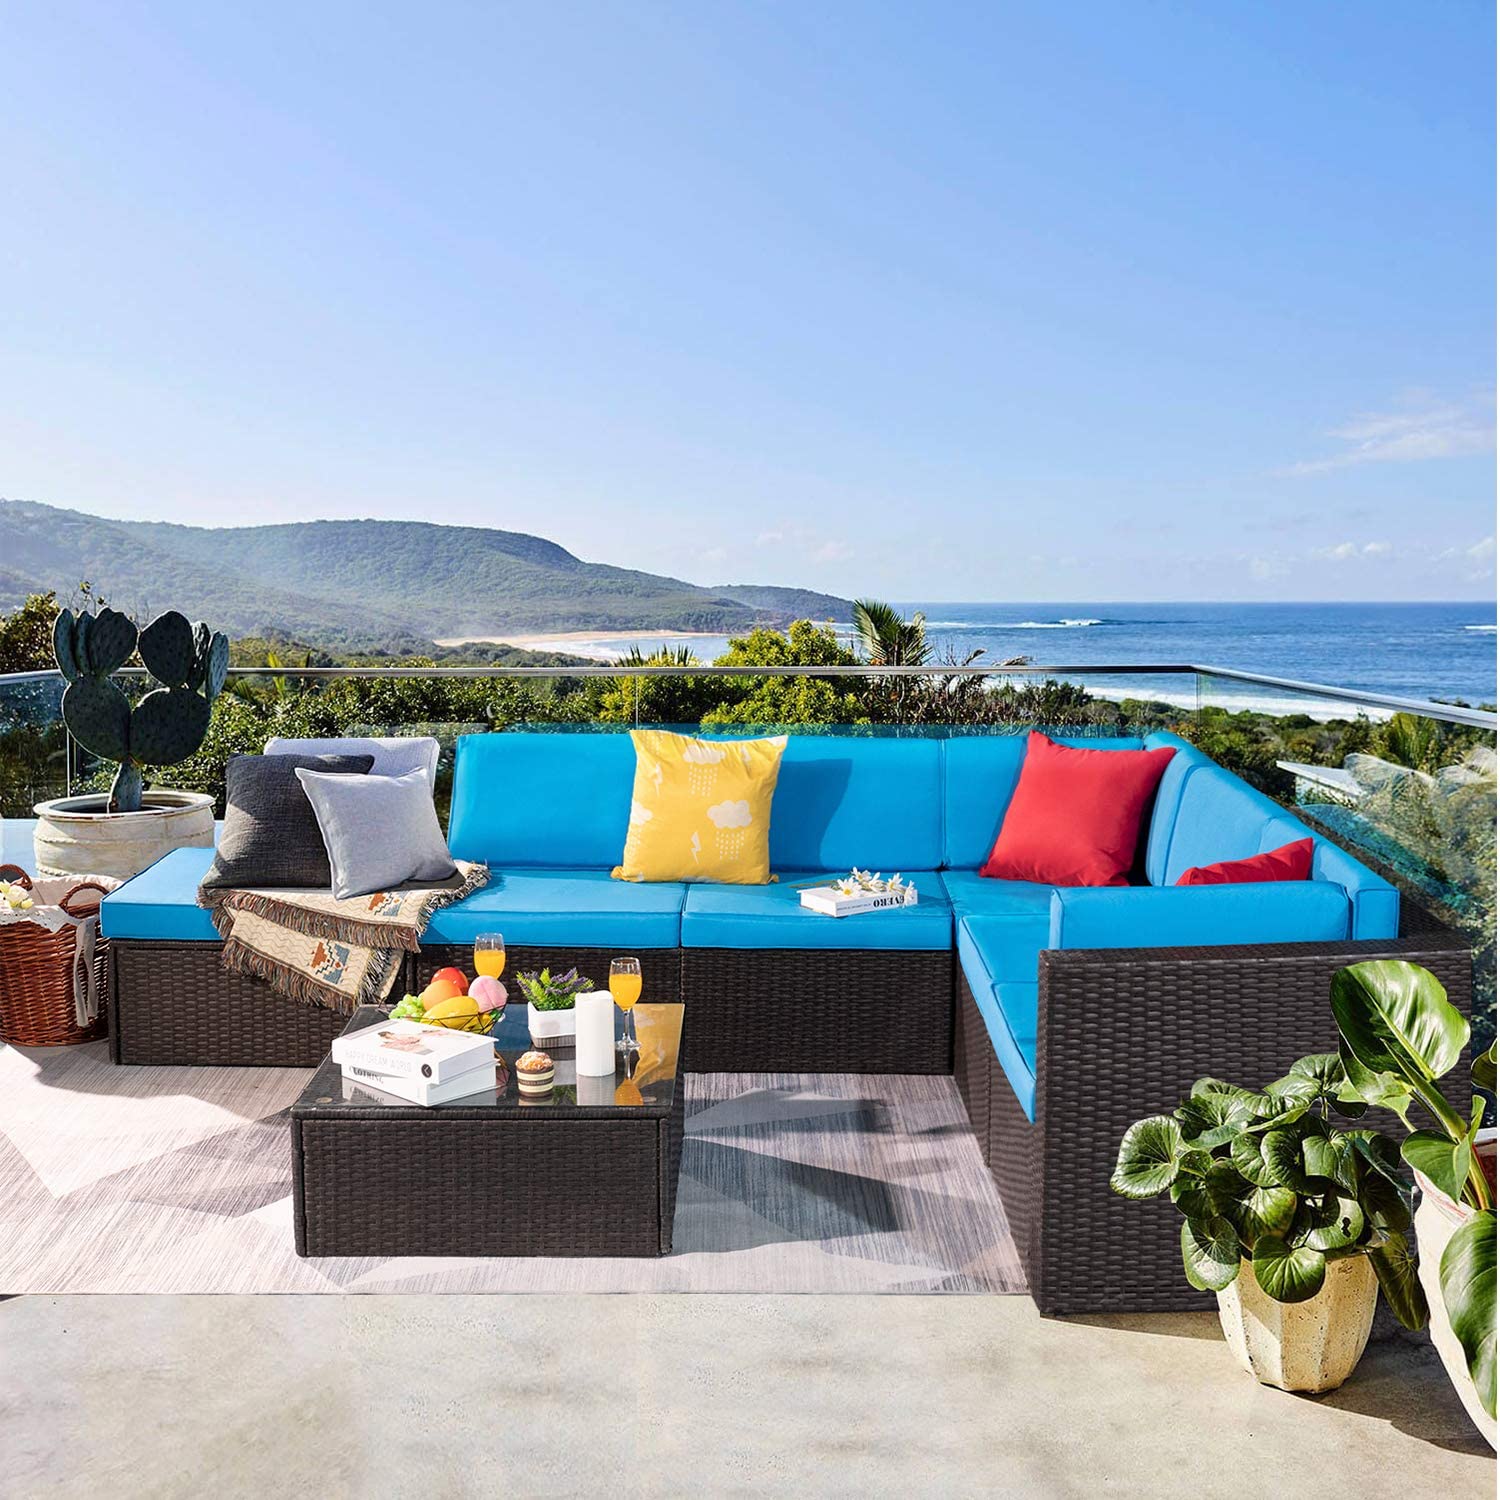 Lacoo 7 Pieces Outdoor Conversation Set All Weather PE Rattan Sectional Sofa Sets with Soft Cushions, Ottoman and Coffee Table, Blue - image 2 of 7